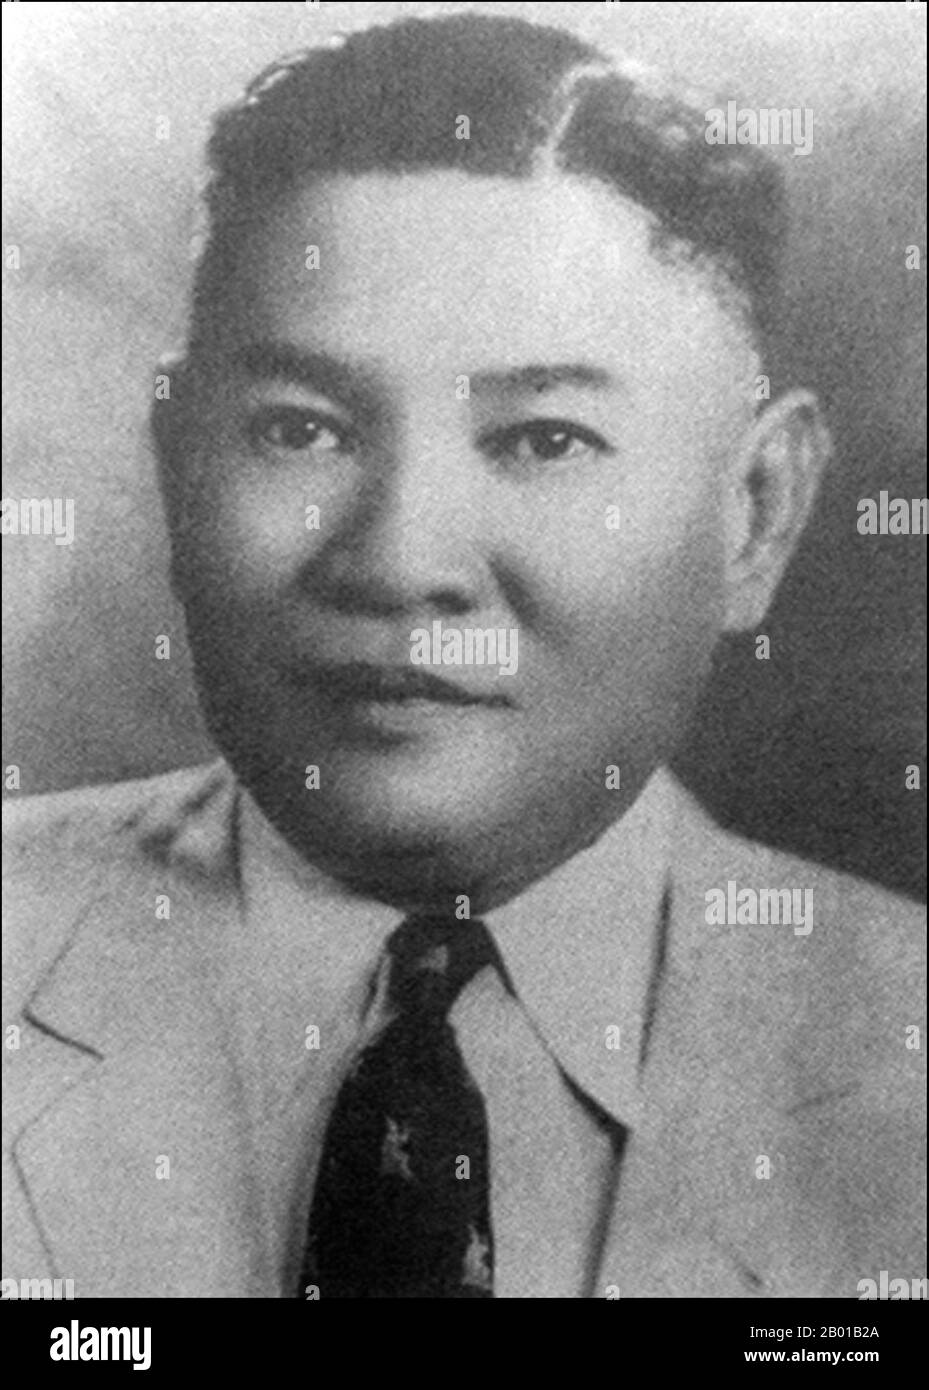 Thailand: Tawee Bunyaket (10 November 1904 - 3 November 1971), Prime Minister of Thailand (r. 31 August 31 1945 - 17 September 1945), c. 1940s.  Tawee Bunyaket was a politician and Prime Minister for a short term. He initially worked as an official at the Ministry of Agriculture. In 1932 he joined the Khana Ratsadon (People's Party) that instigated the 1932 coup. After the end of World War II, Tawee was elected as Prime Minister on August 31, 1945 and formed the 12th Thai administration. However he was only chosen because the preferred candidate Seni Pramoj wasn't available. Stock Photo